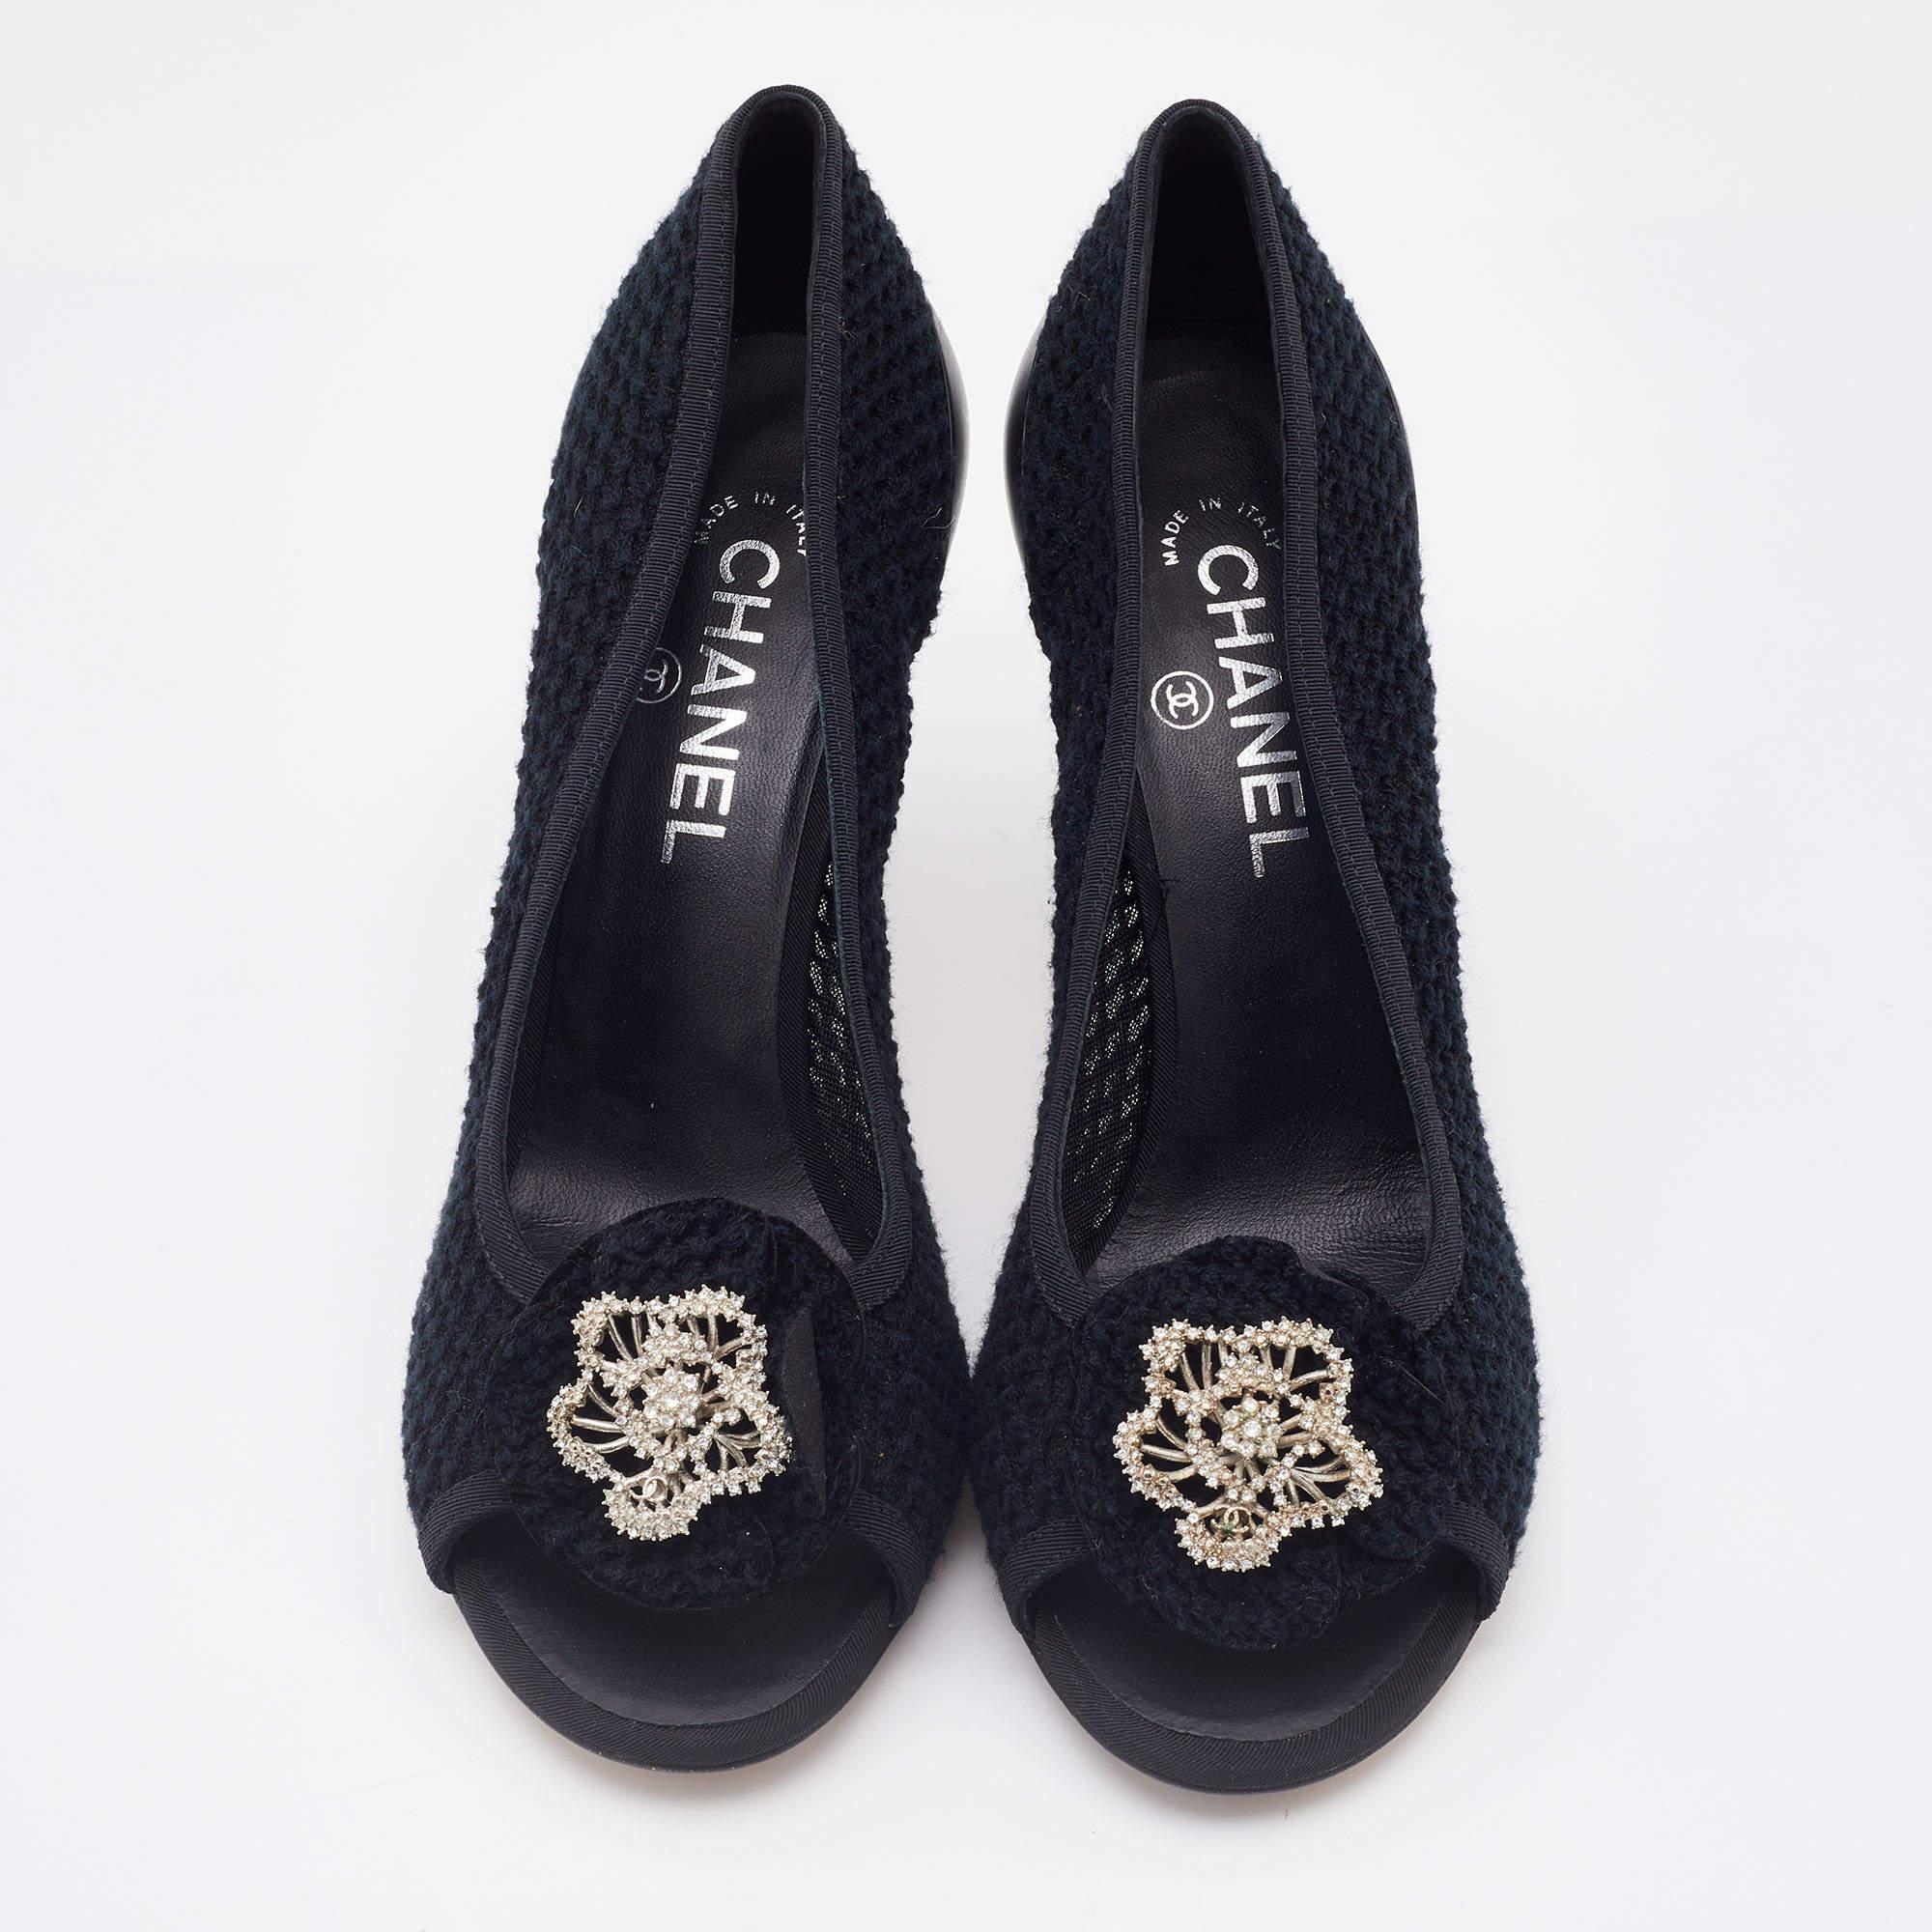 Chanel Black Knit Fabric CC Camellia Crystal Embellished Open Toe Pumps Size 40 1